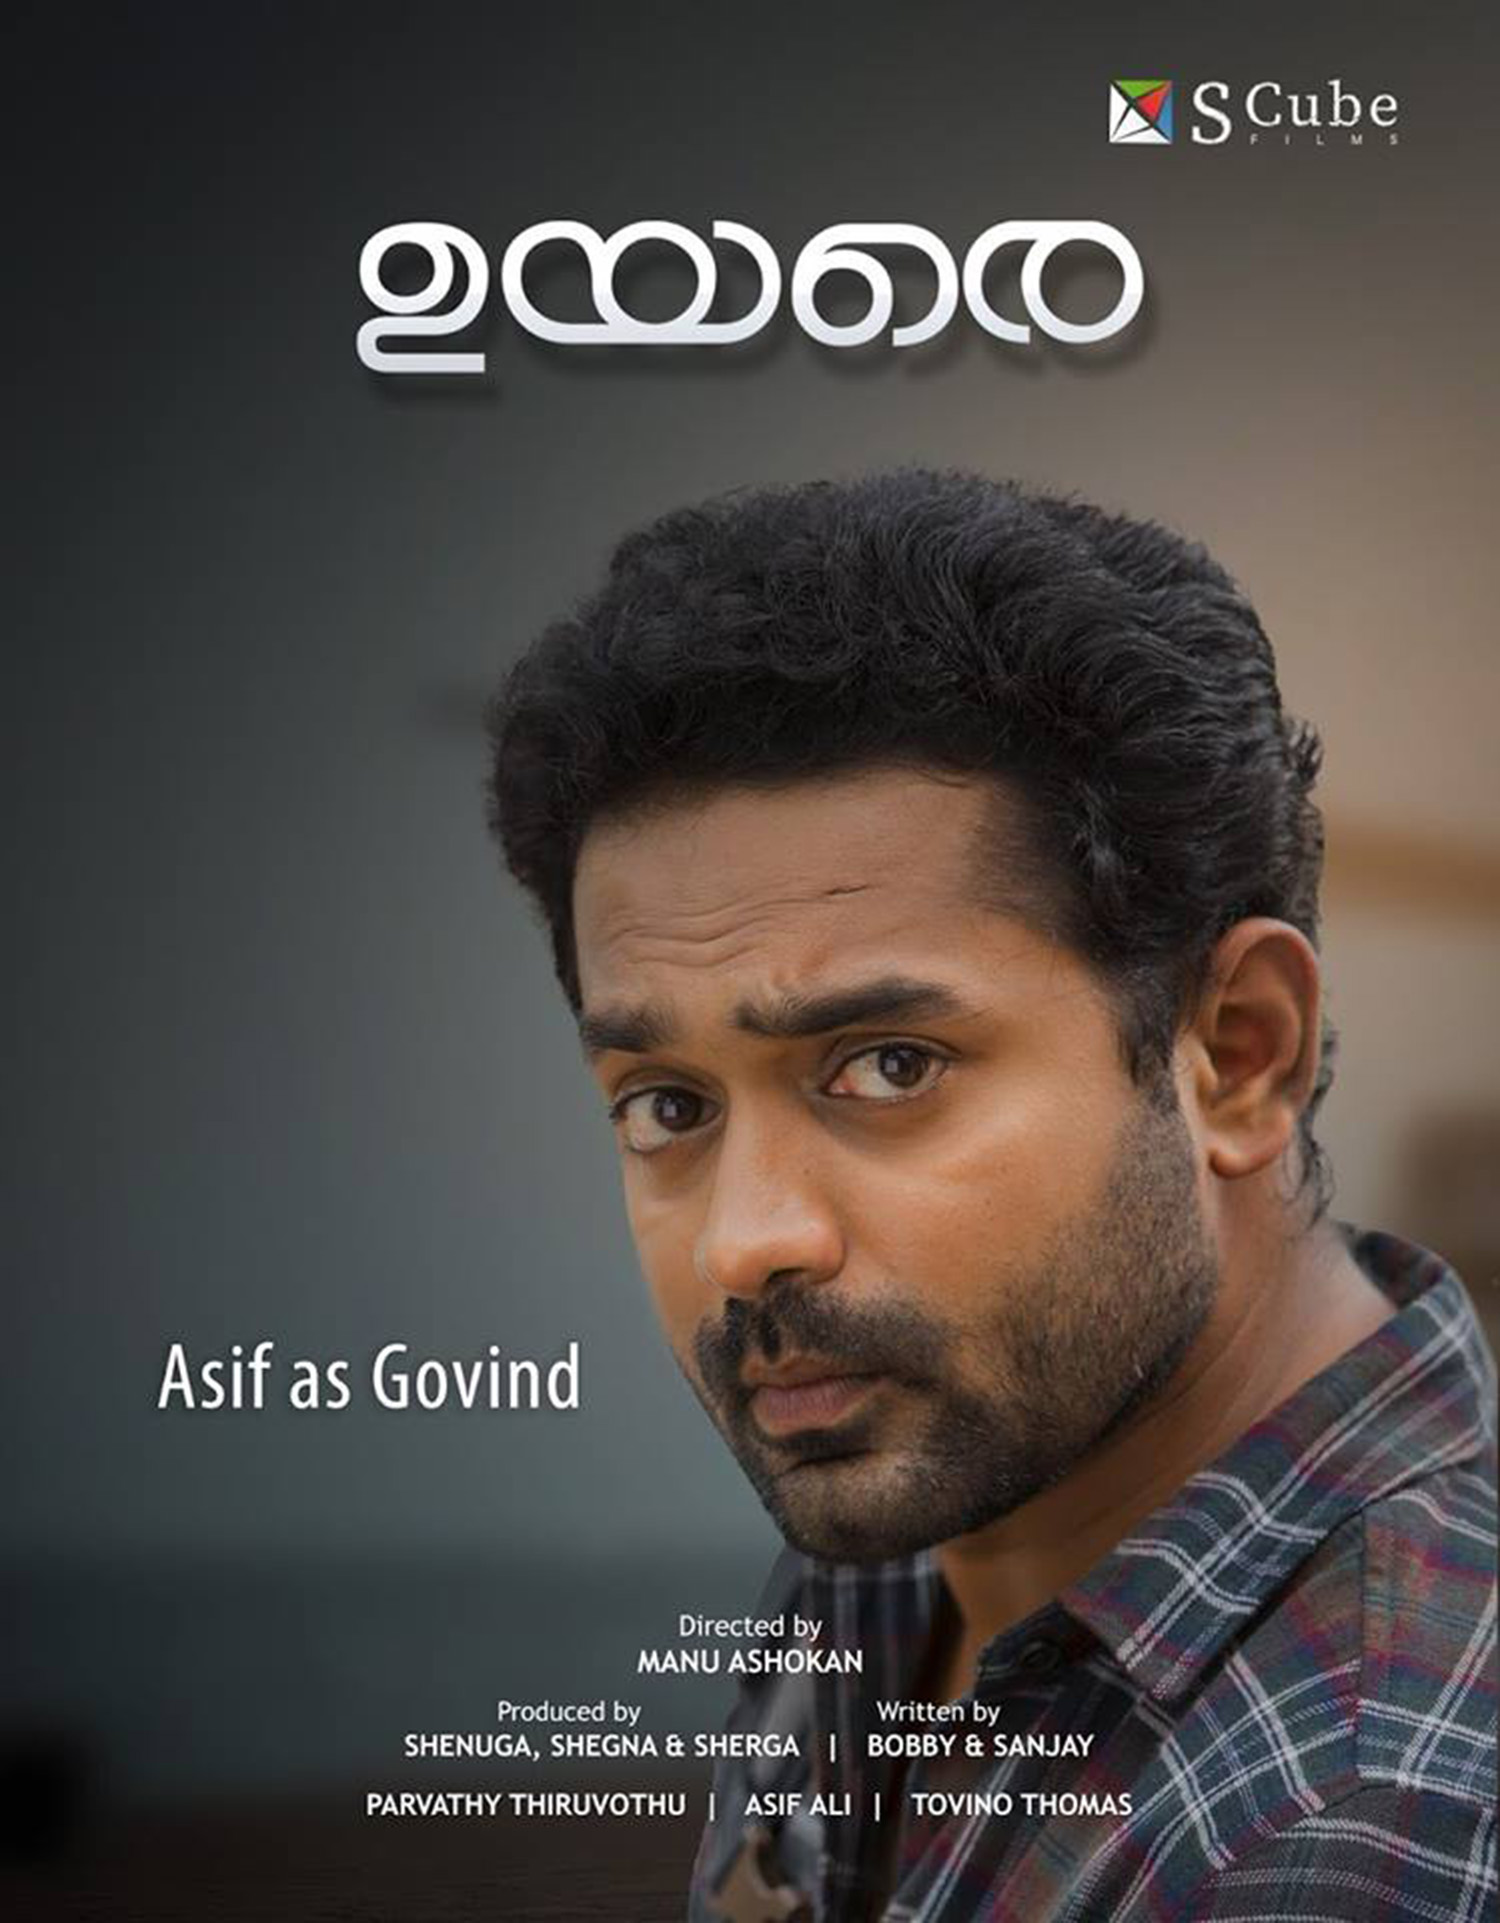 Uyare,Uyare malayalam movie,Uyare movie character intro poster,asif ali's character poster of uyare movie,asif ali,tovino thomas,parvathy,uyare movie poster,asif ali in uyare movie,uyare movie stills,uyare movie asif ali's character name 